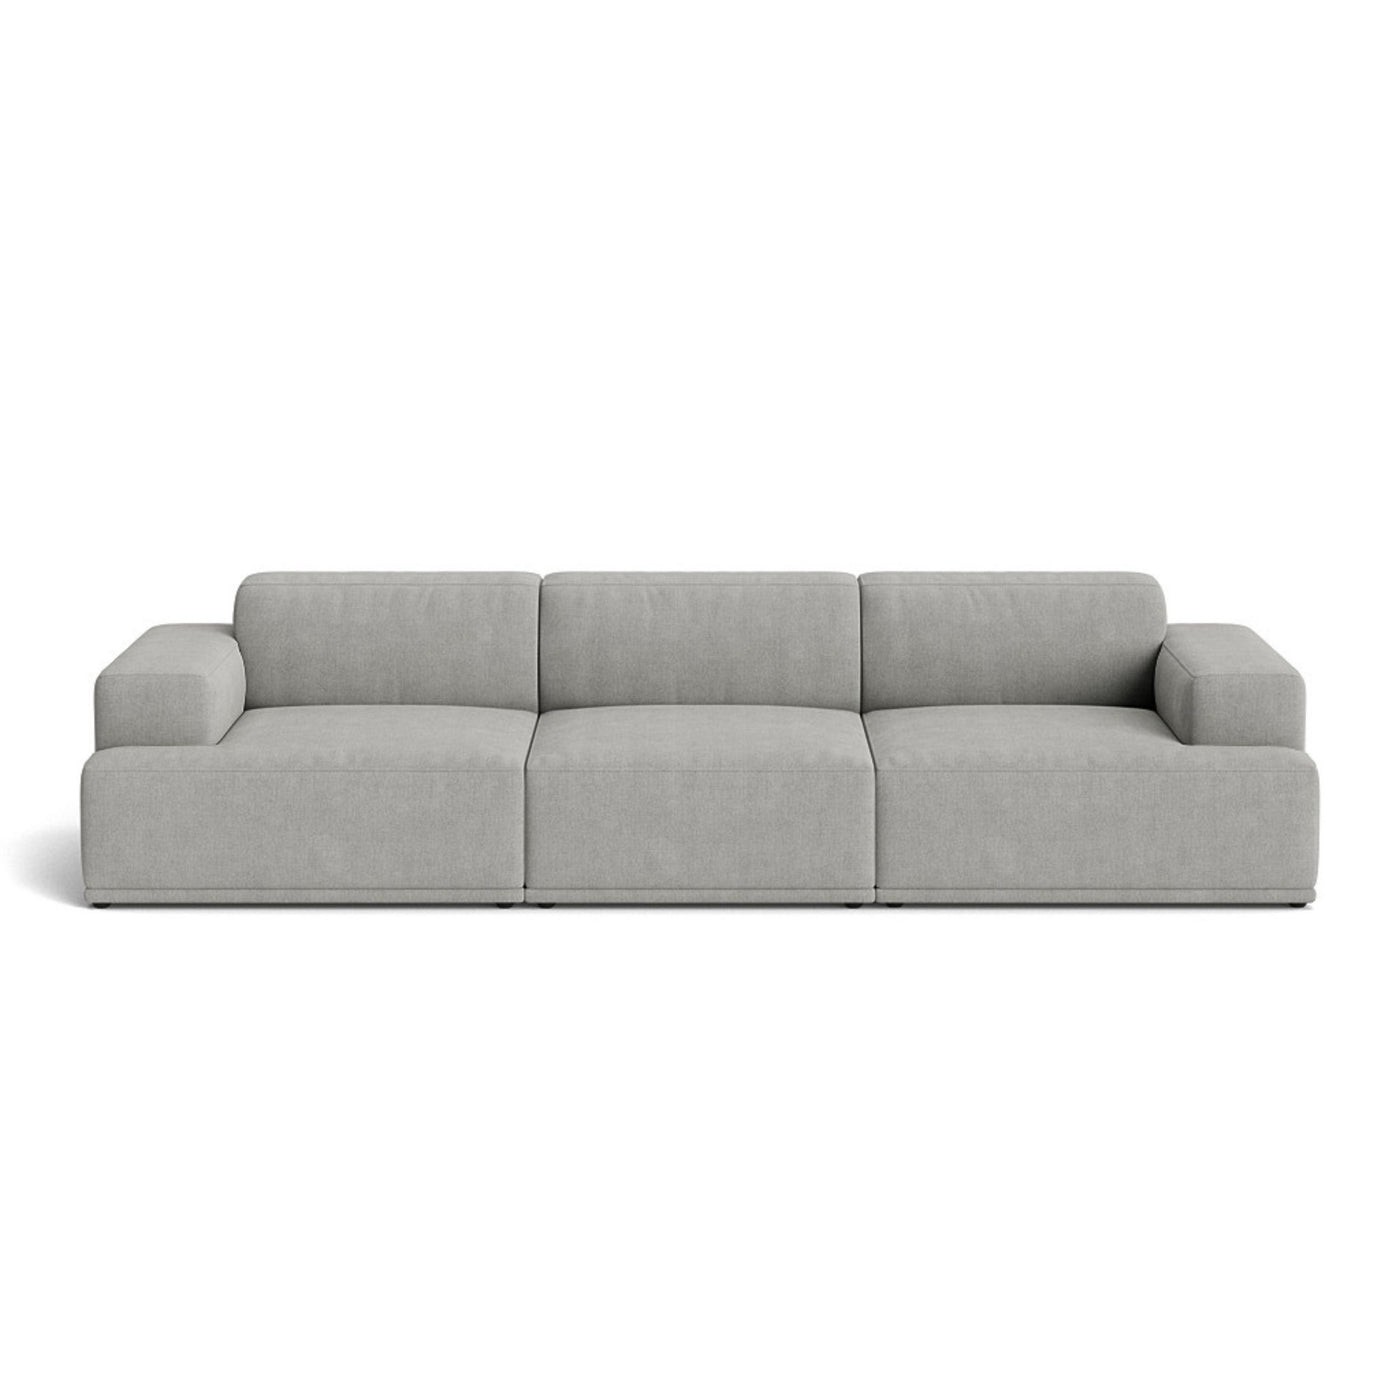 Muuto Connect Soft Modular 3 Seater Sofa, configuration 1. Made-to-order from someday designs. #colour_fiord-151